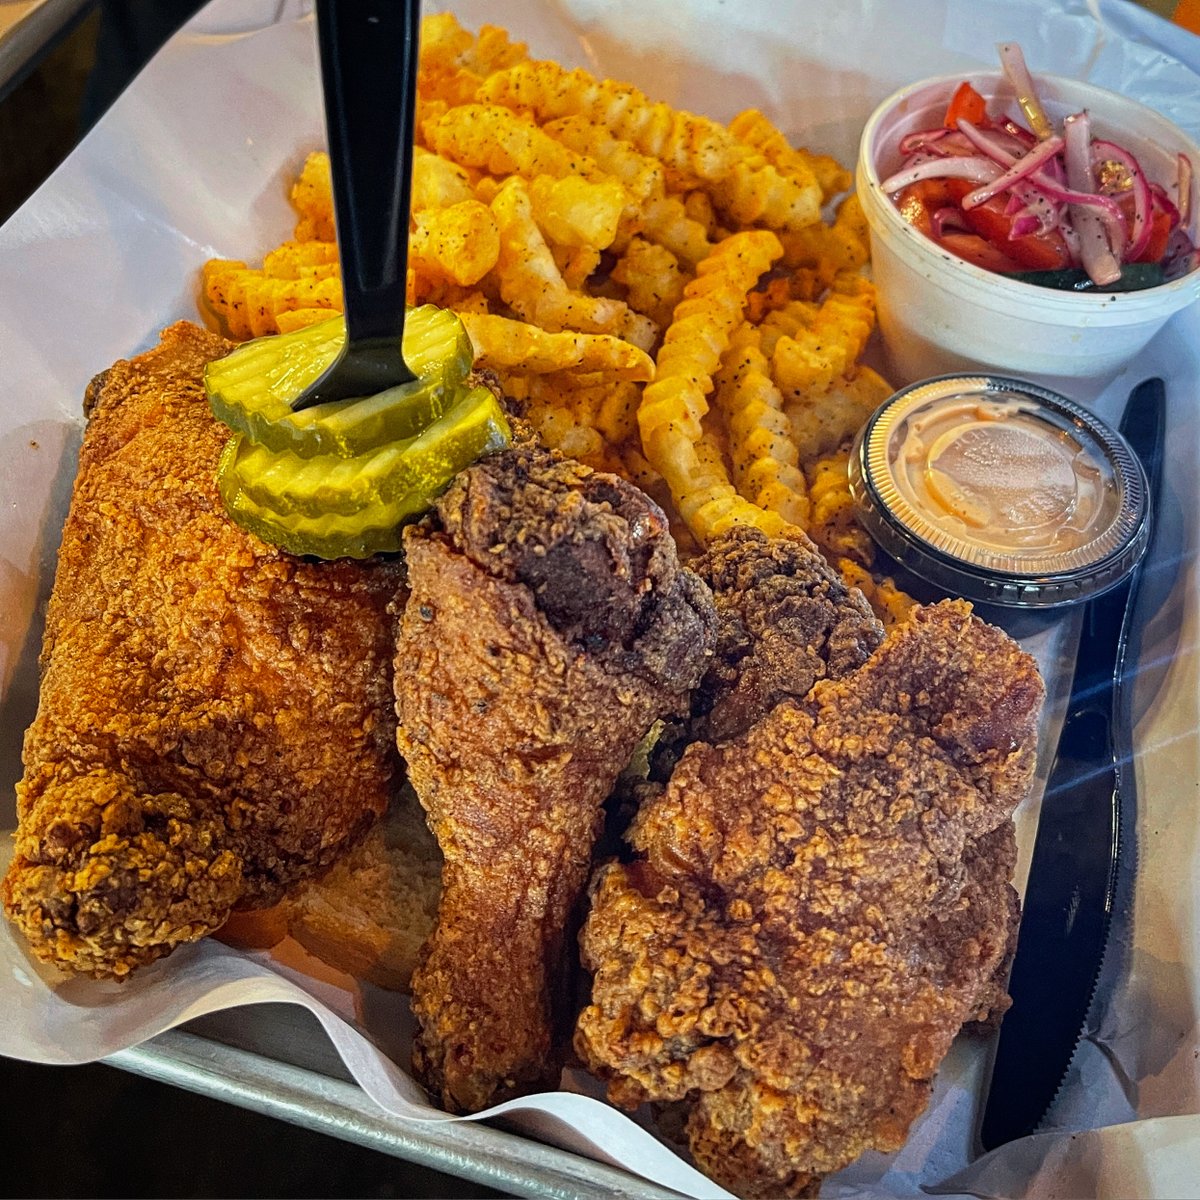 Who needs a little Southern humpday happiness? 🐓❤️🐓❤️🐓 #stlsouthern #friedchicken #nashvillehotchicken #stleats #eatlocal #stlfoodie #explorestlouis #stlcatering #catering